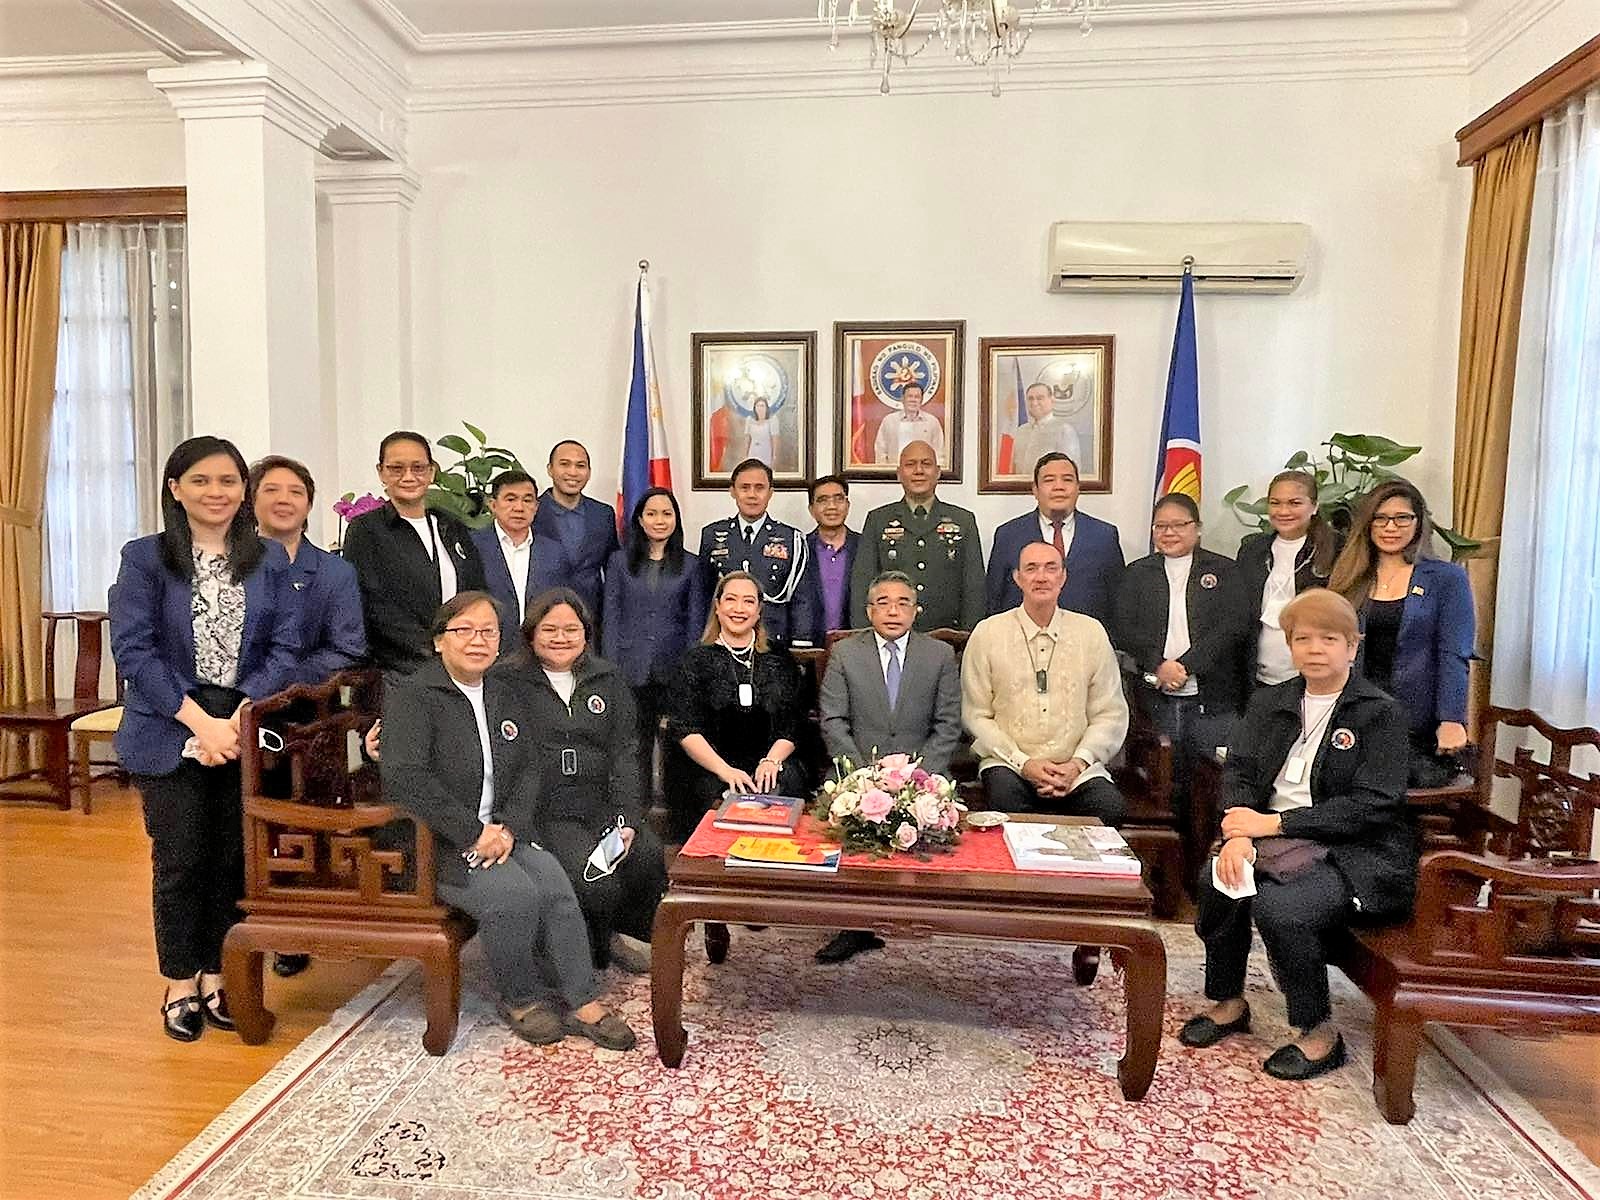 Philippine Ambassador to Vietnam H.E. Meynardo Montealegre is flanked by 31st Chef de Mission and PSC Commissioner Ramon Fernandez, and wife Karla Fernandez joined by PSC and Embassy staff at the Philippine Embassy in Hanoi on Sunday.